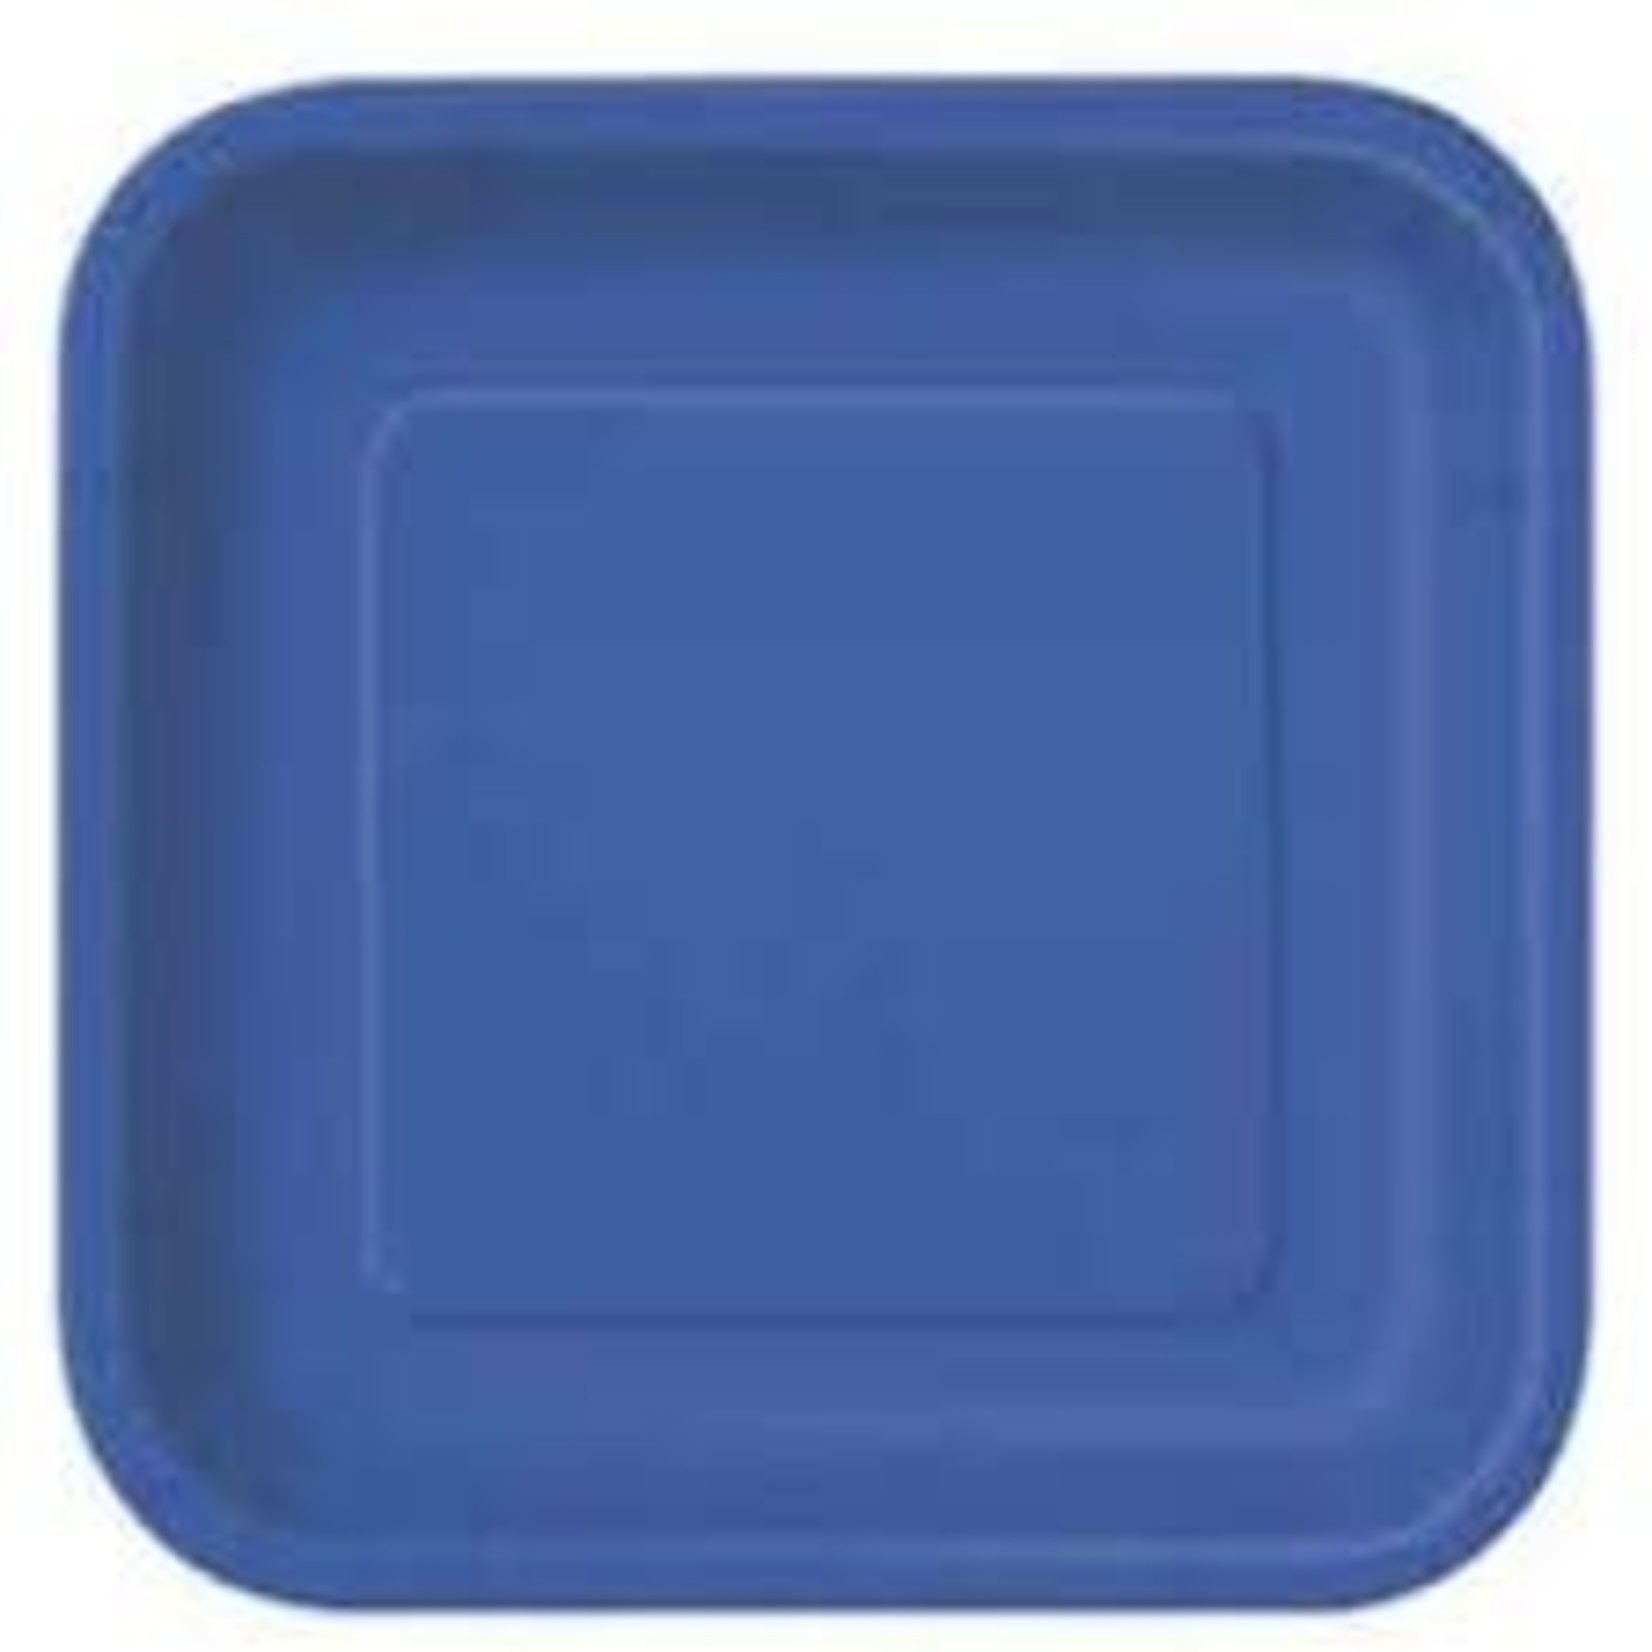 Royal Blue Lunch Plate